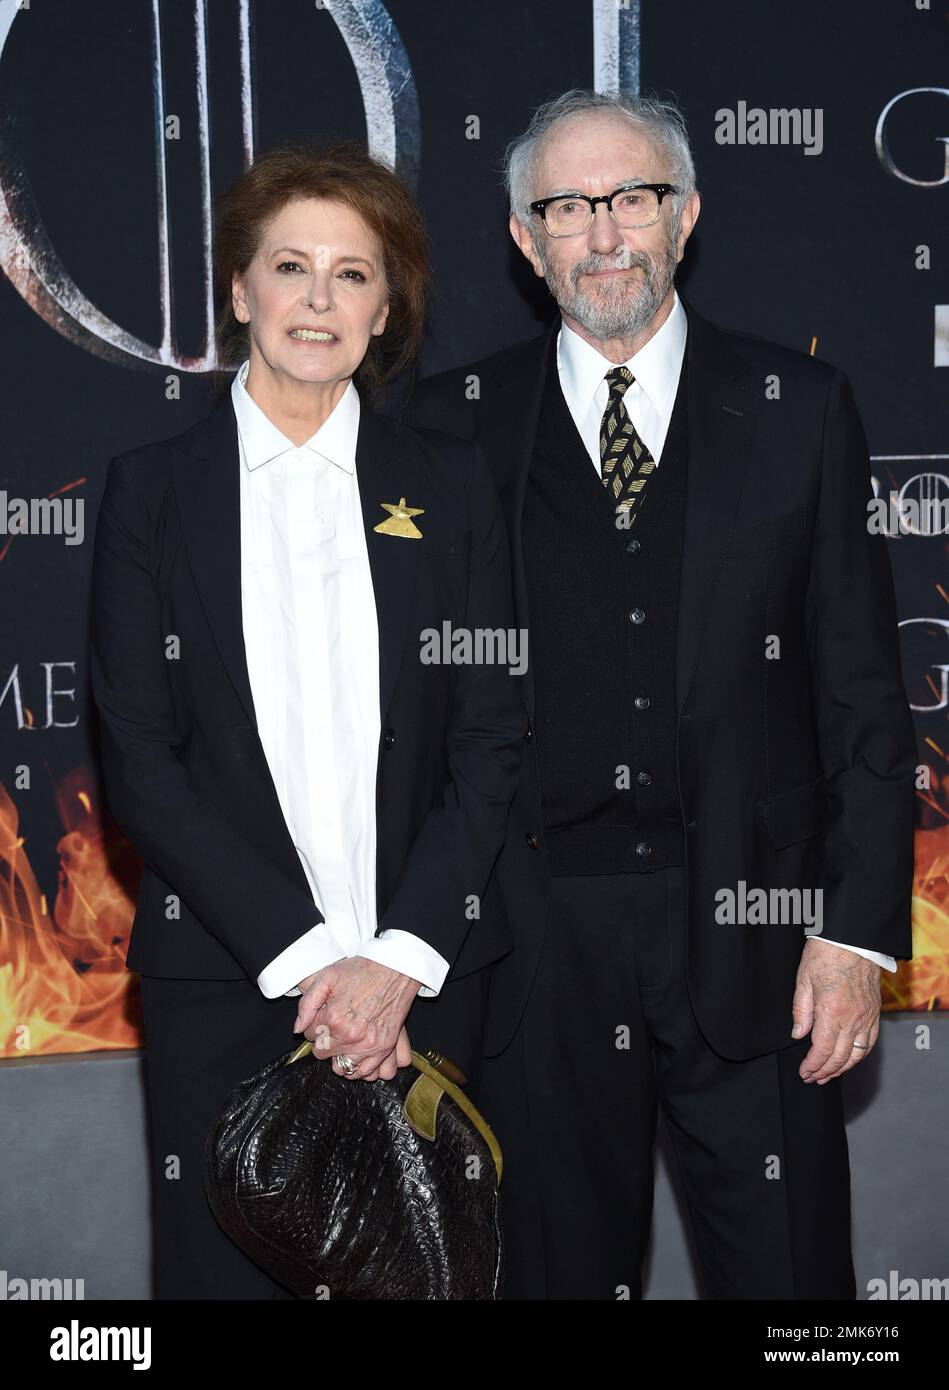 Actor Jonathan Pryce, right, and wife Kate Fahy attend HBO's "Game of  Thrones" final season premiere at Radio City Music Hall on Wednesday, April  3, 2019, in New York. (Photo by Evan